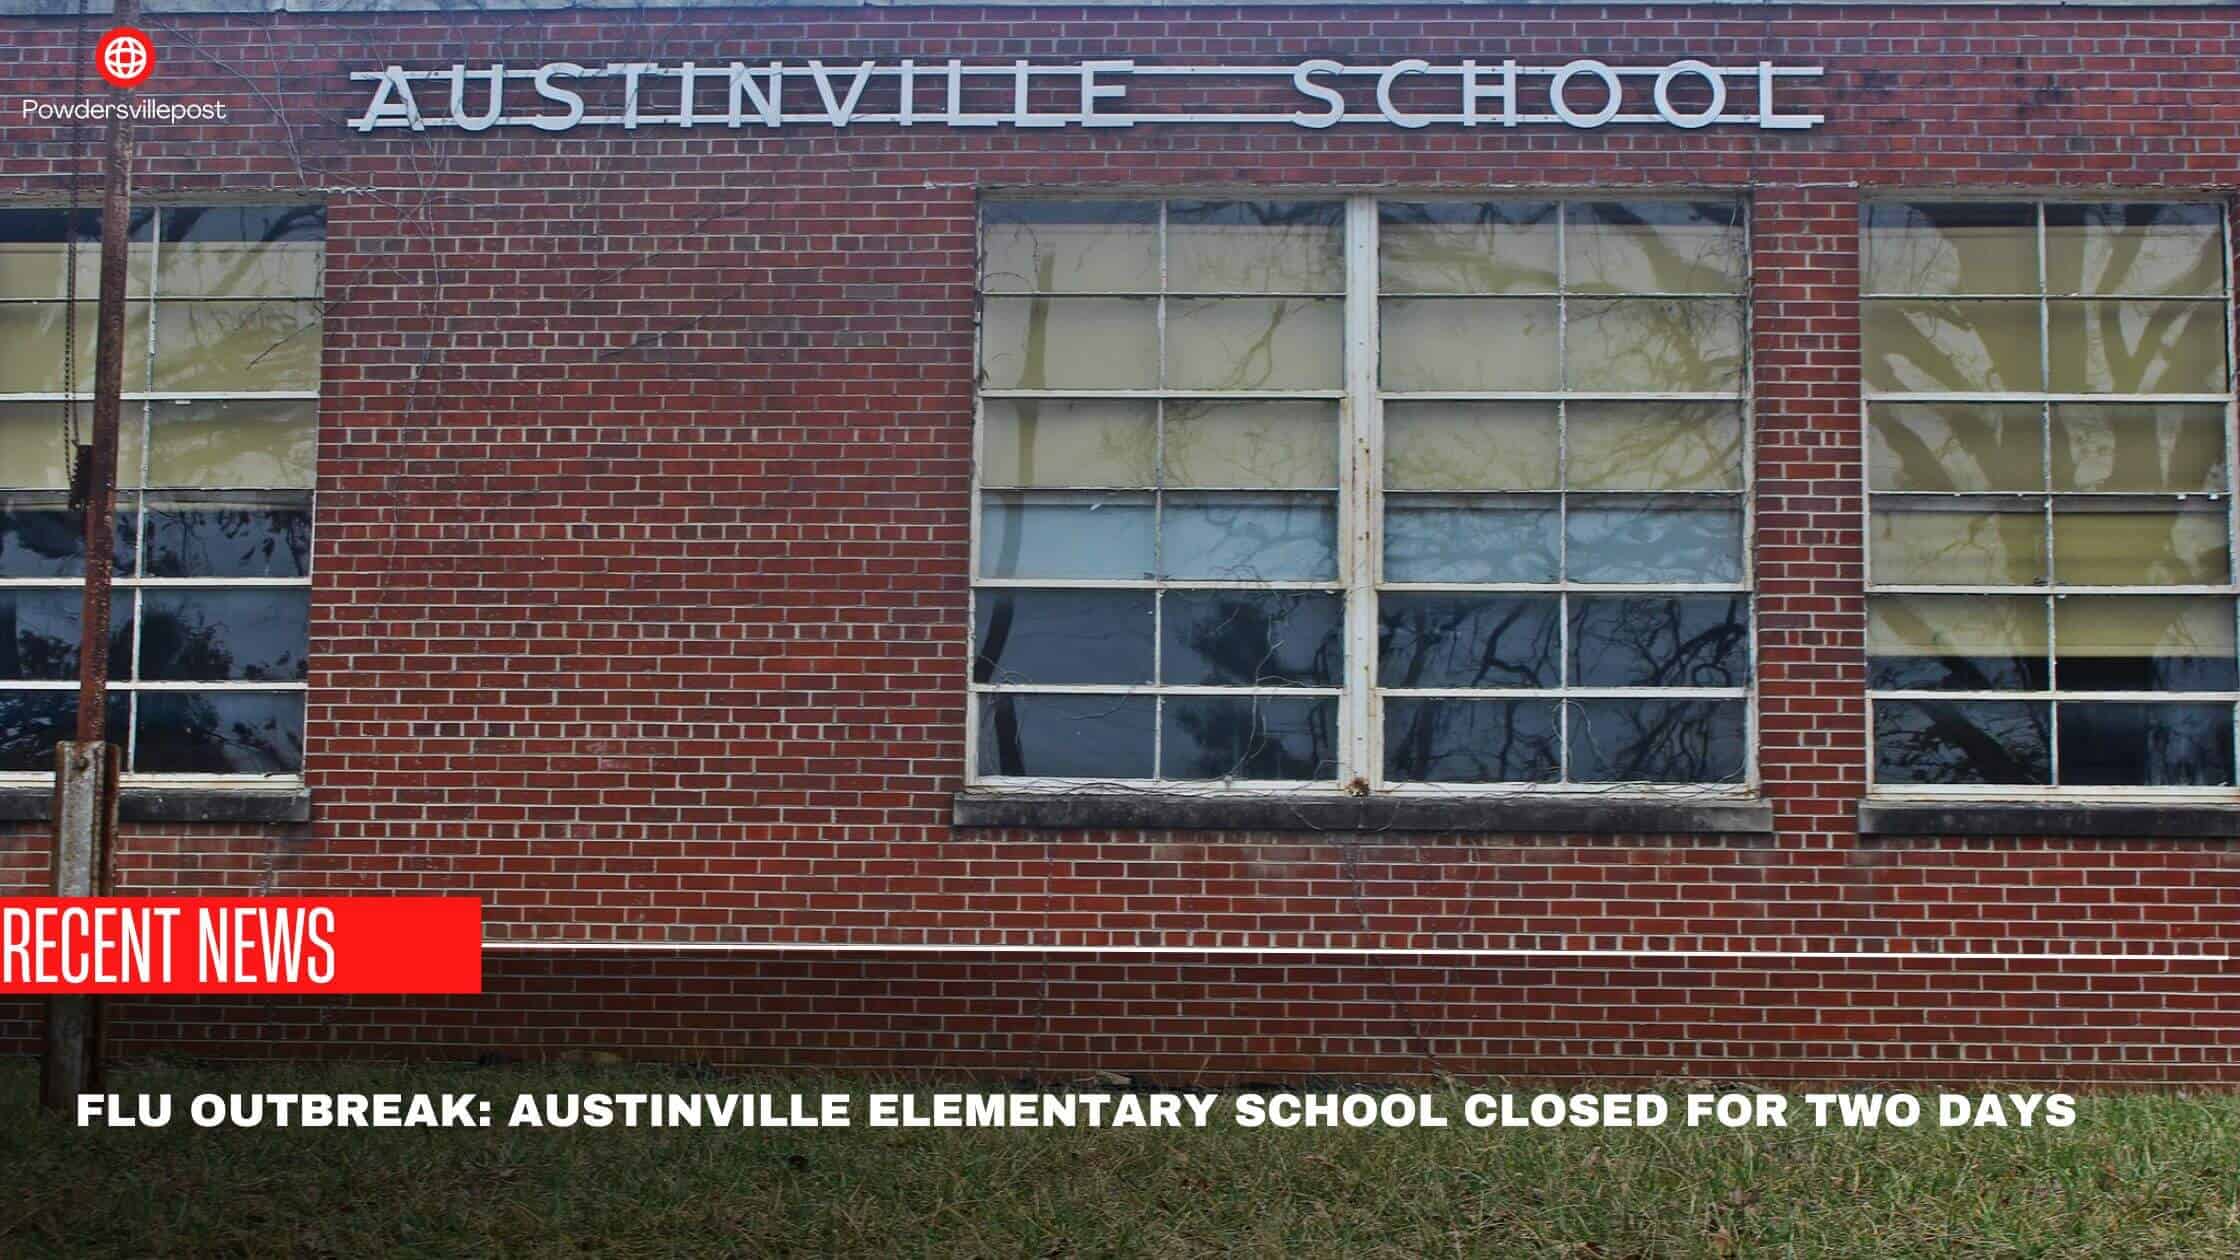 Flu Outbreak Austinville Elementary School Closed For Two Days